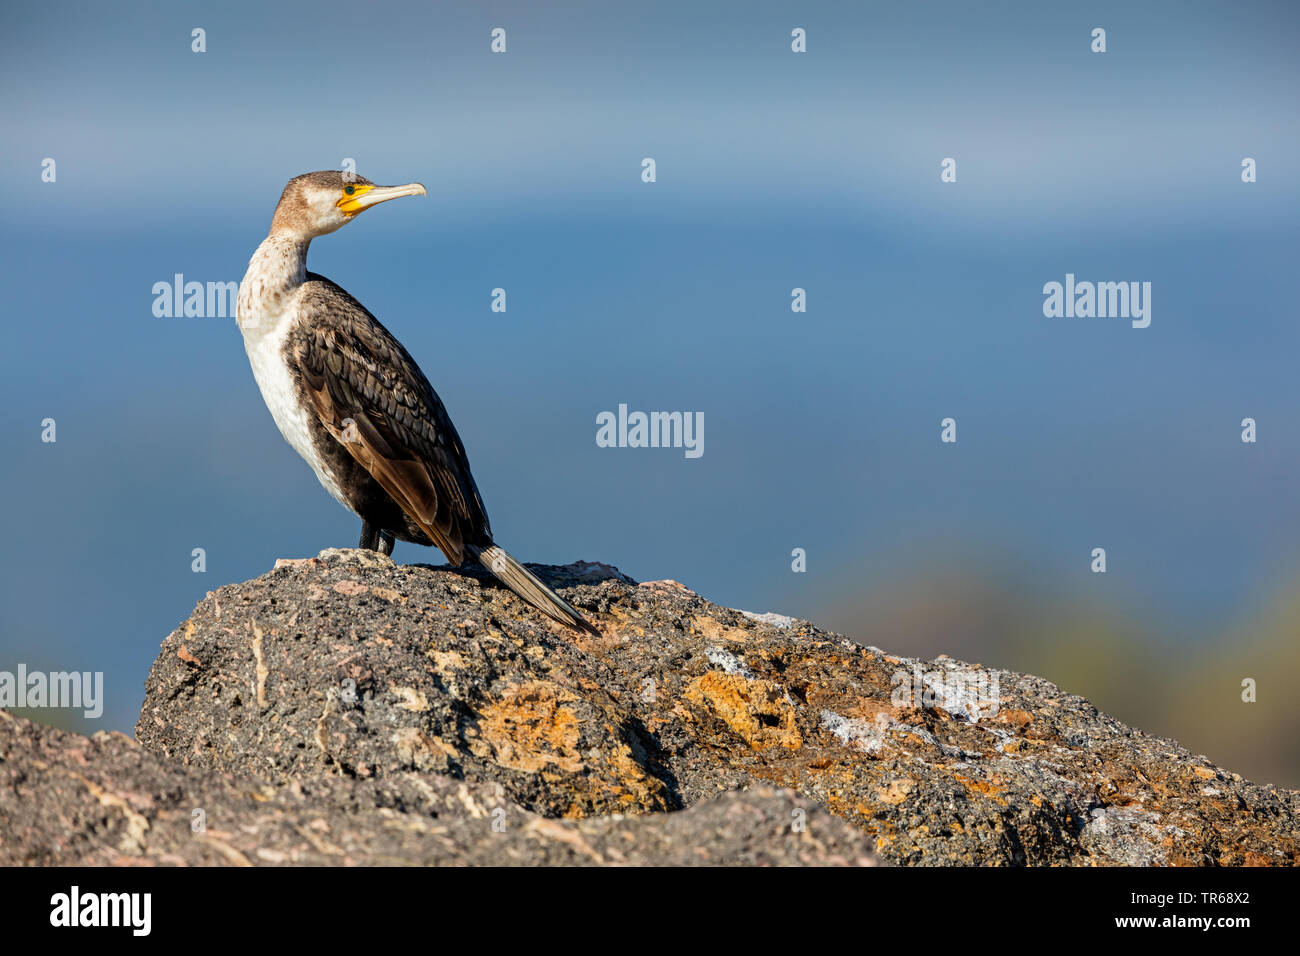 great cormorant (Phalacrocorax carbo), sitting on a rock and looking back, side view, Greece, Lesbos Stock Photo